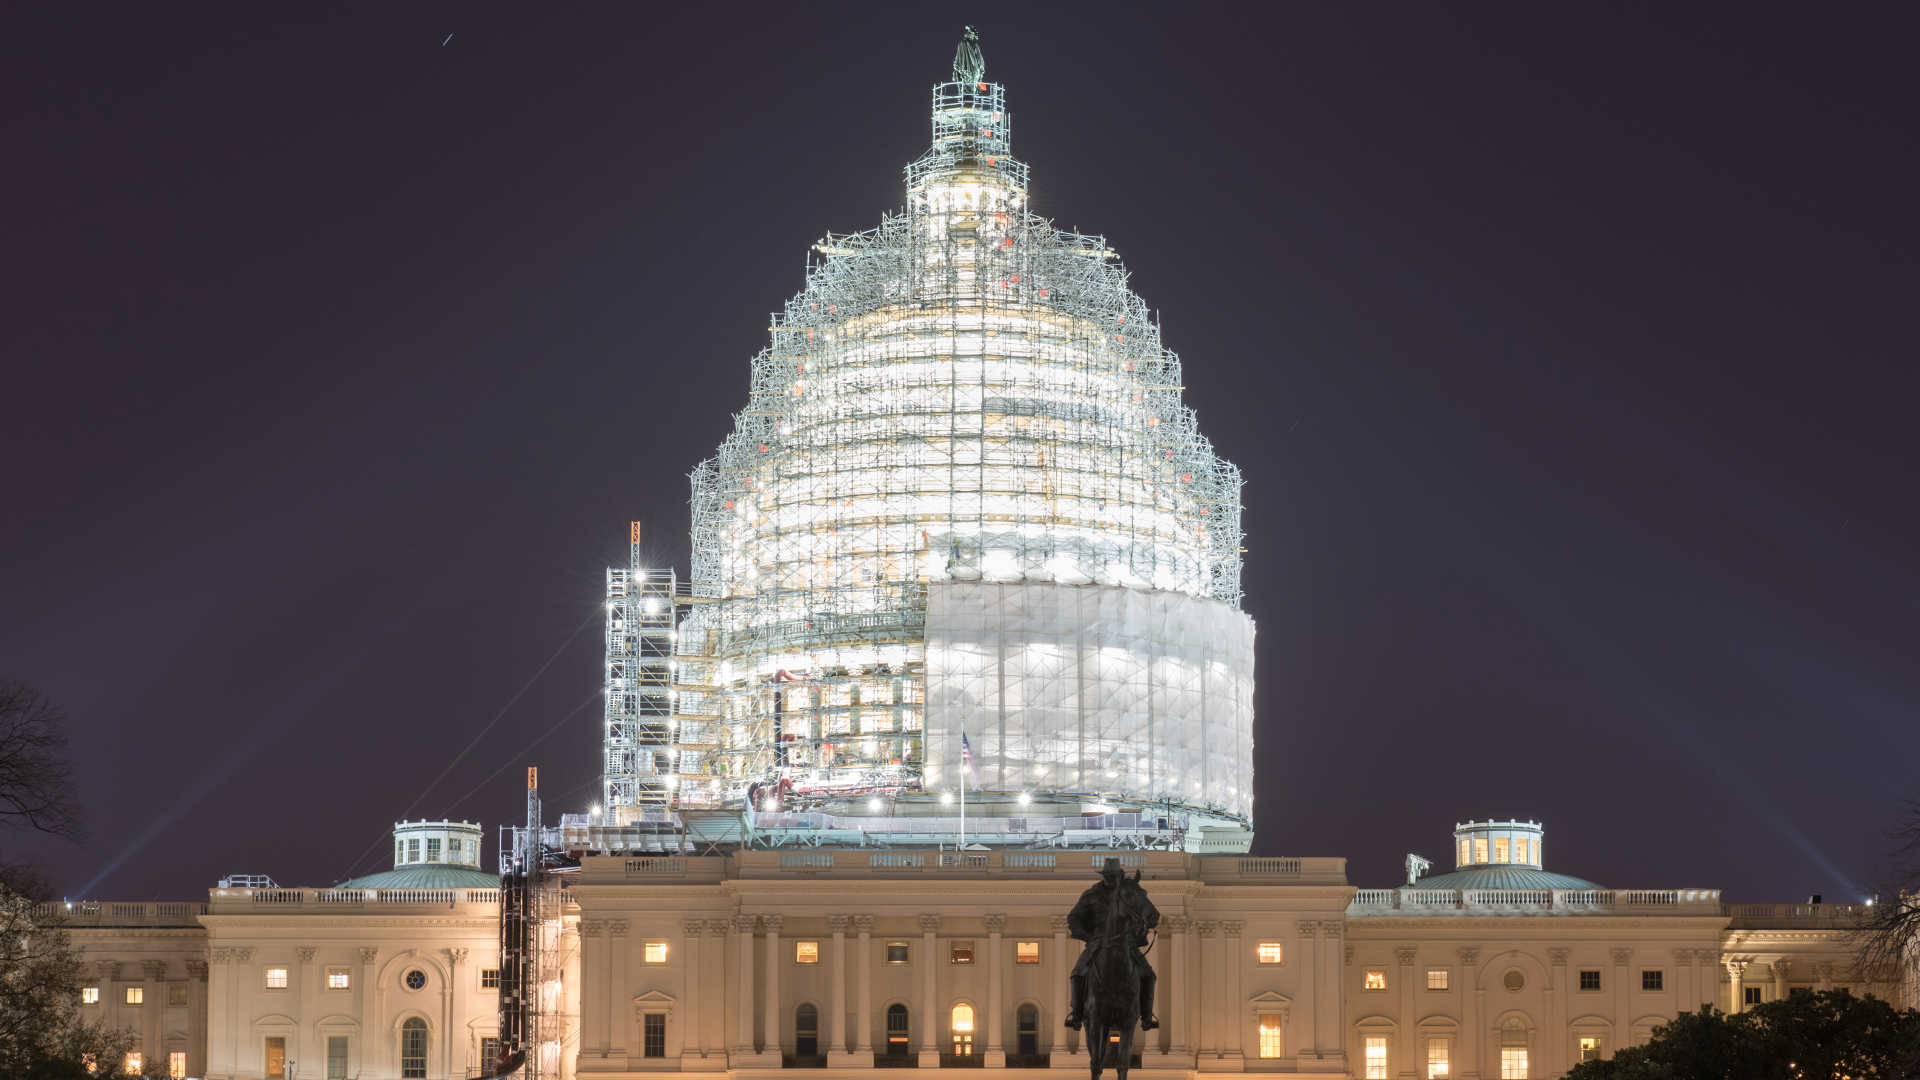 US Capitol building dome under renovation at night